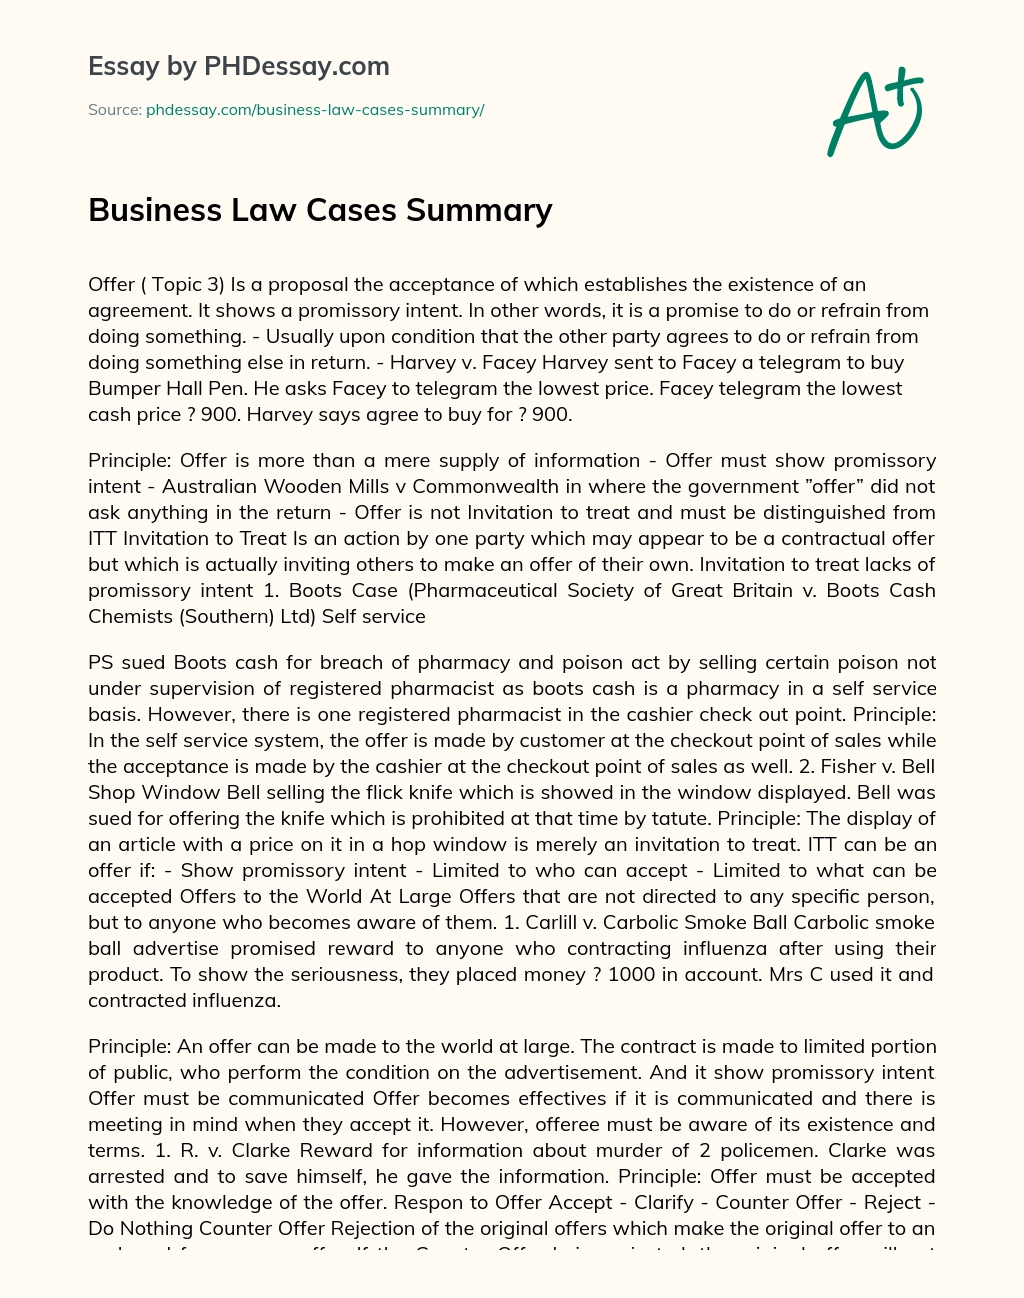 Business Law Cases Summary essay